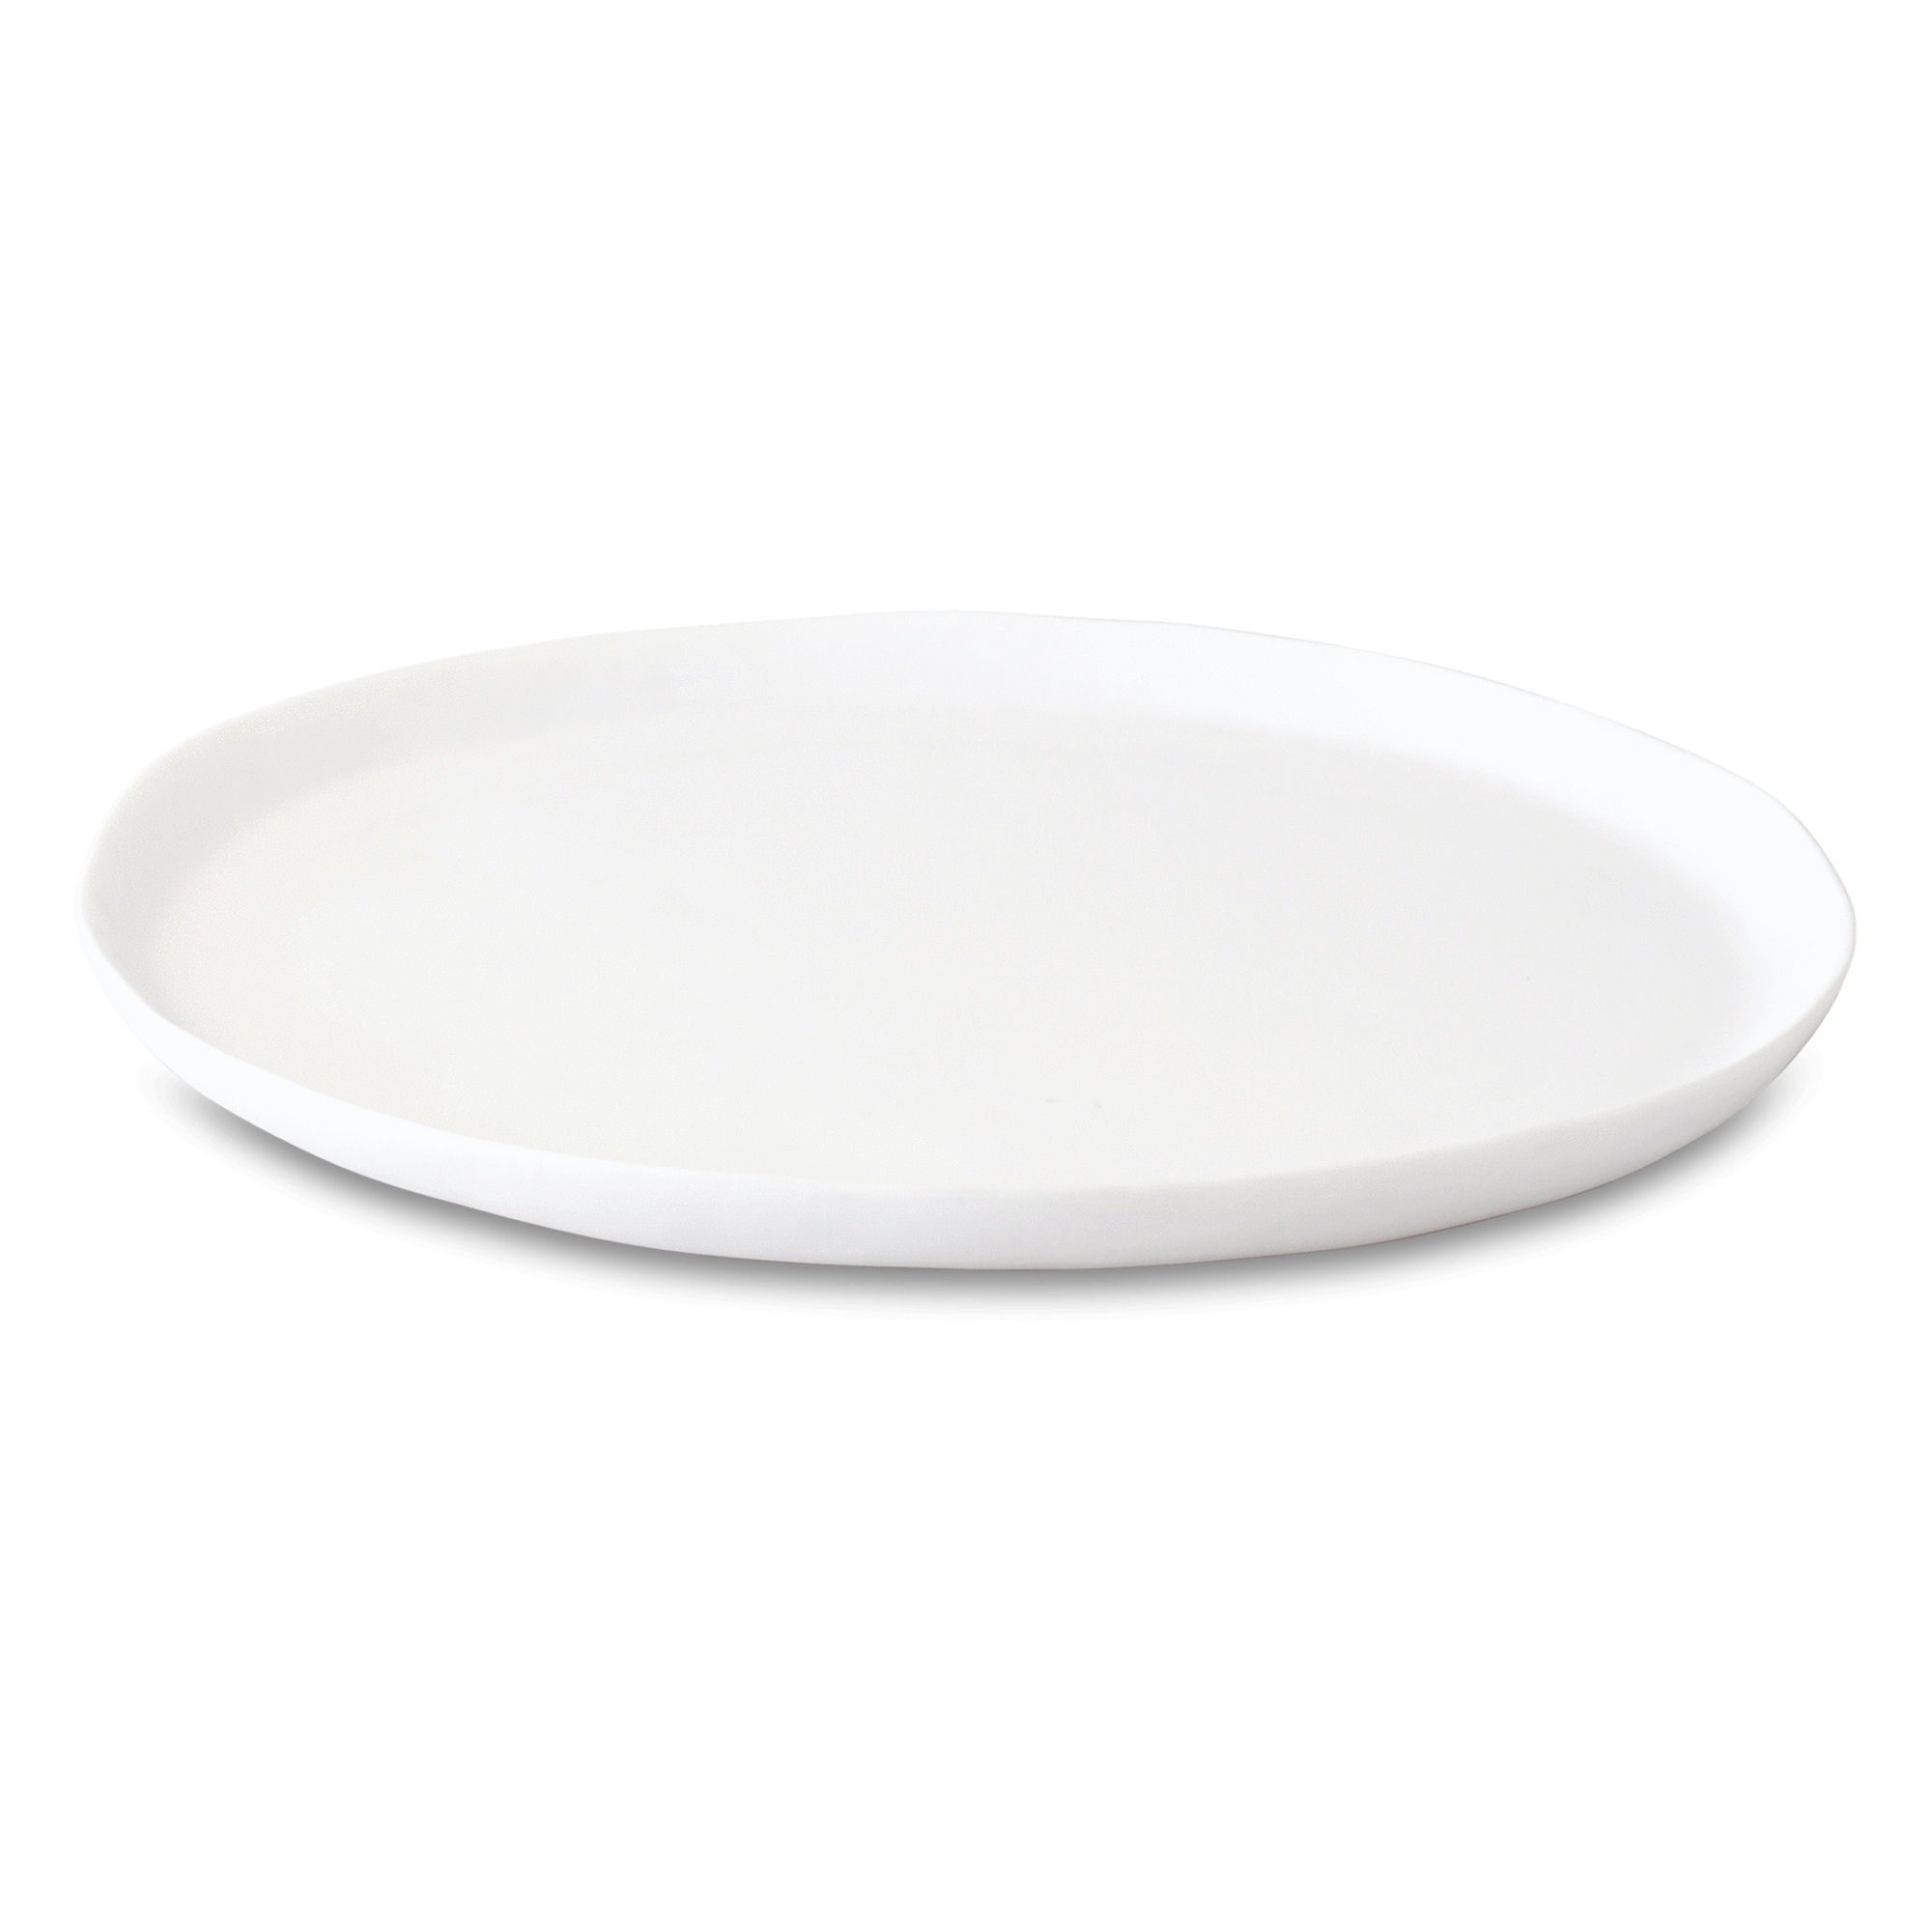 The Sculpted Platter is made of lead/BPA free, food-safe resin.